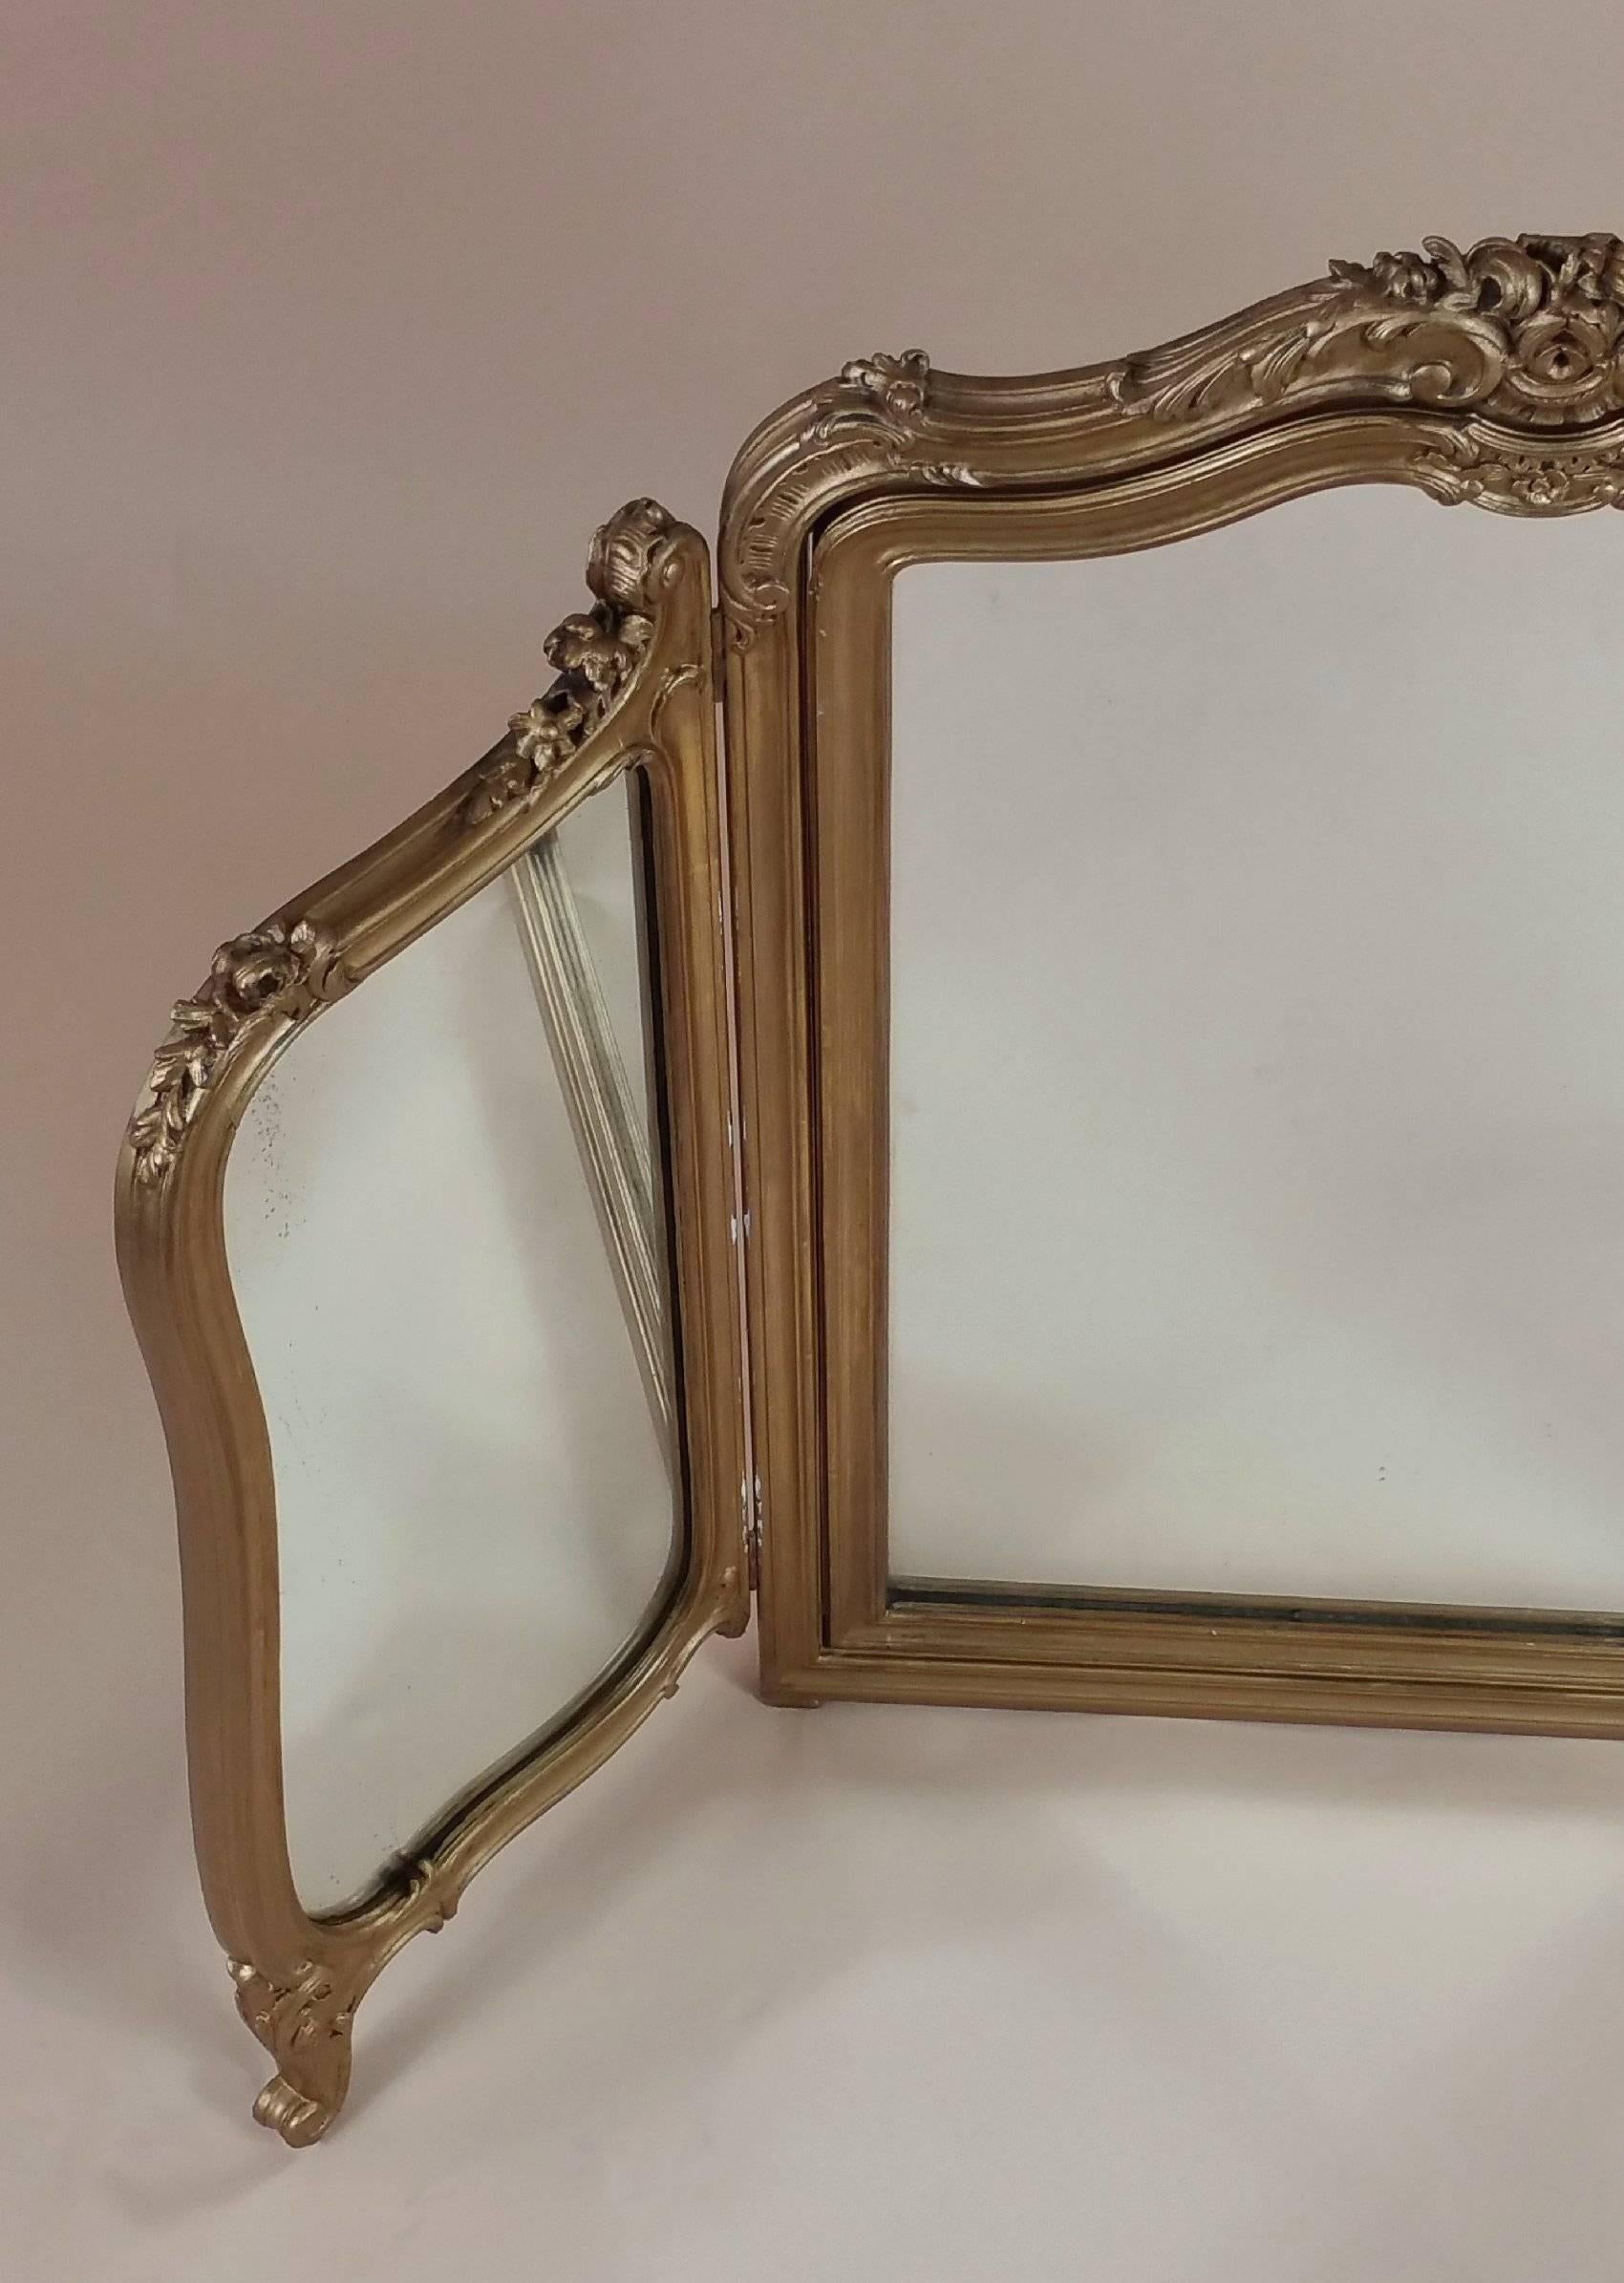 19th Century English Carved Giltwood Folding Triptych Mirror In Good Condition For Sale In London, west Sussex